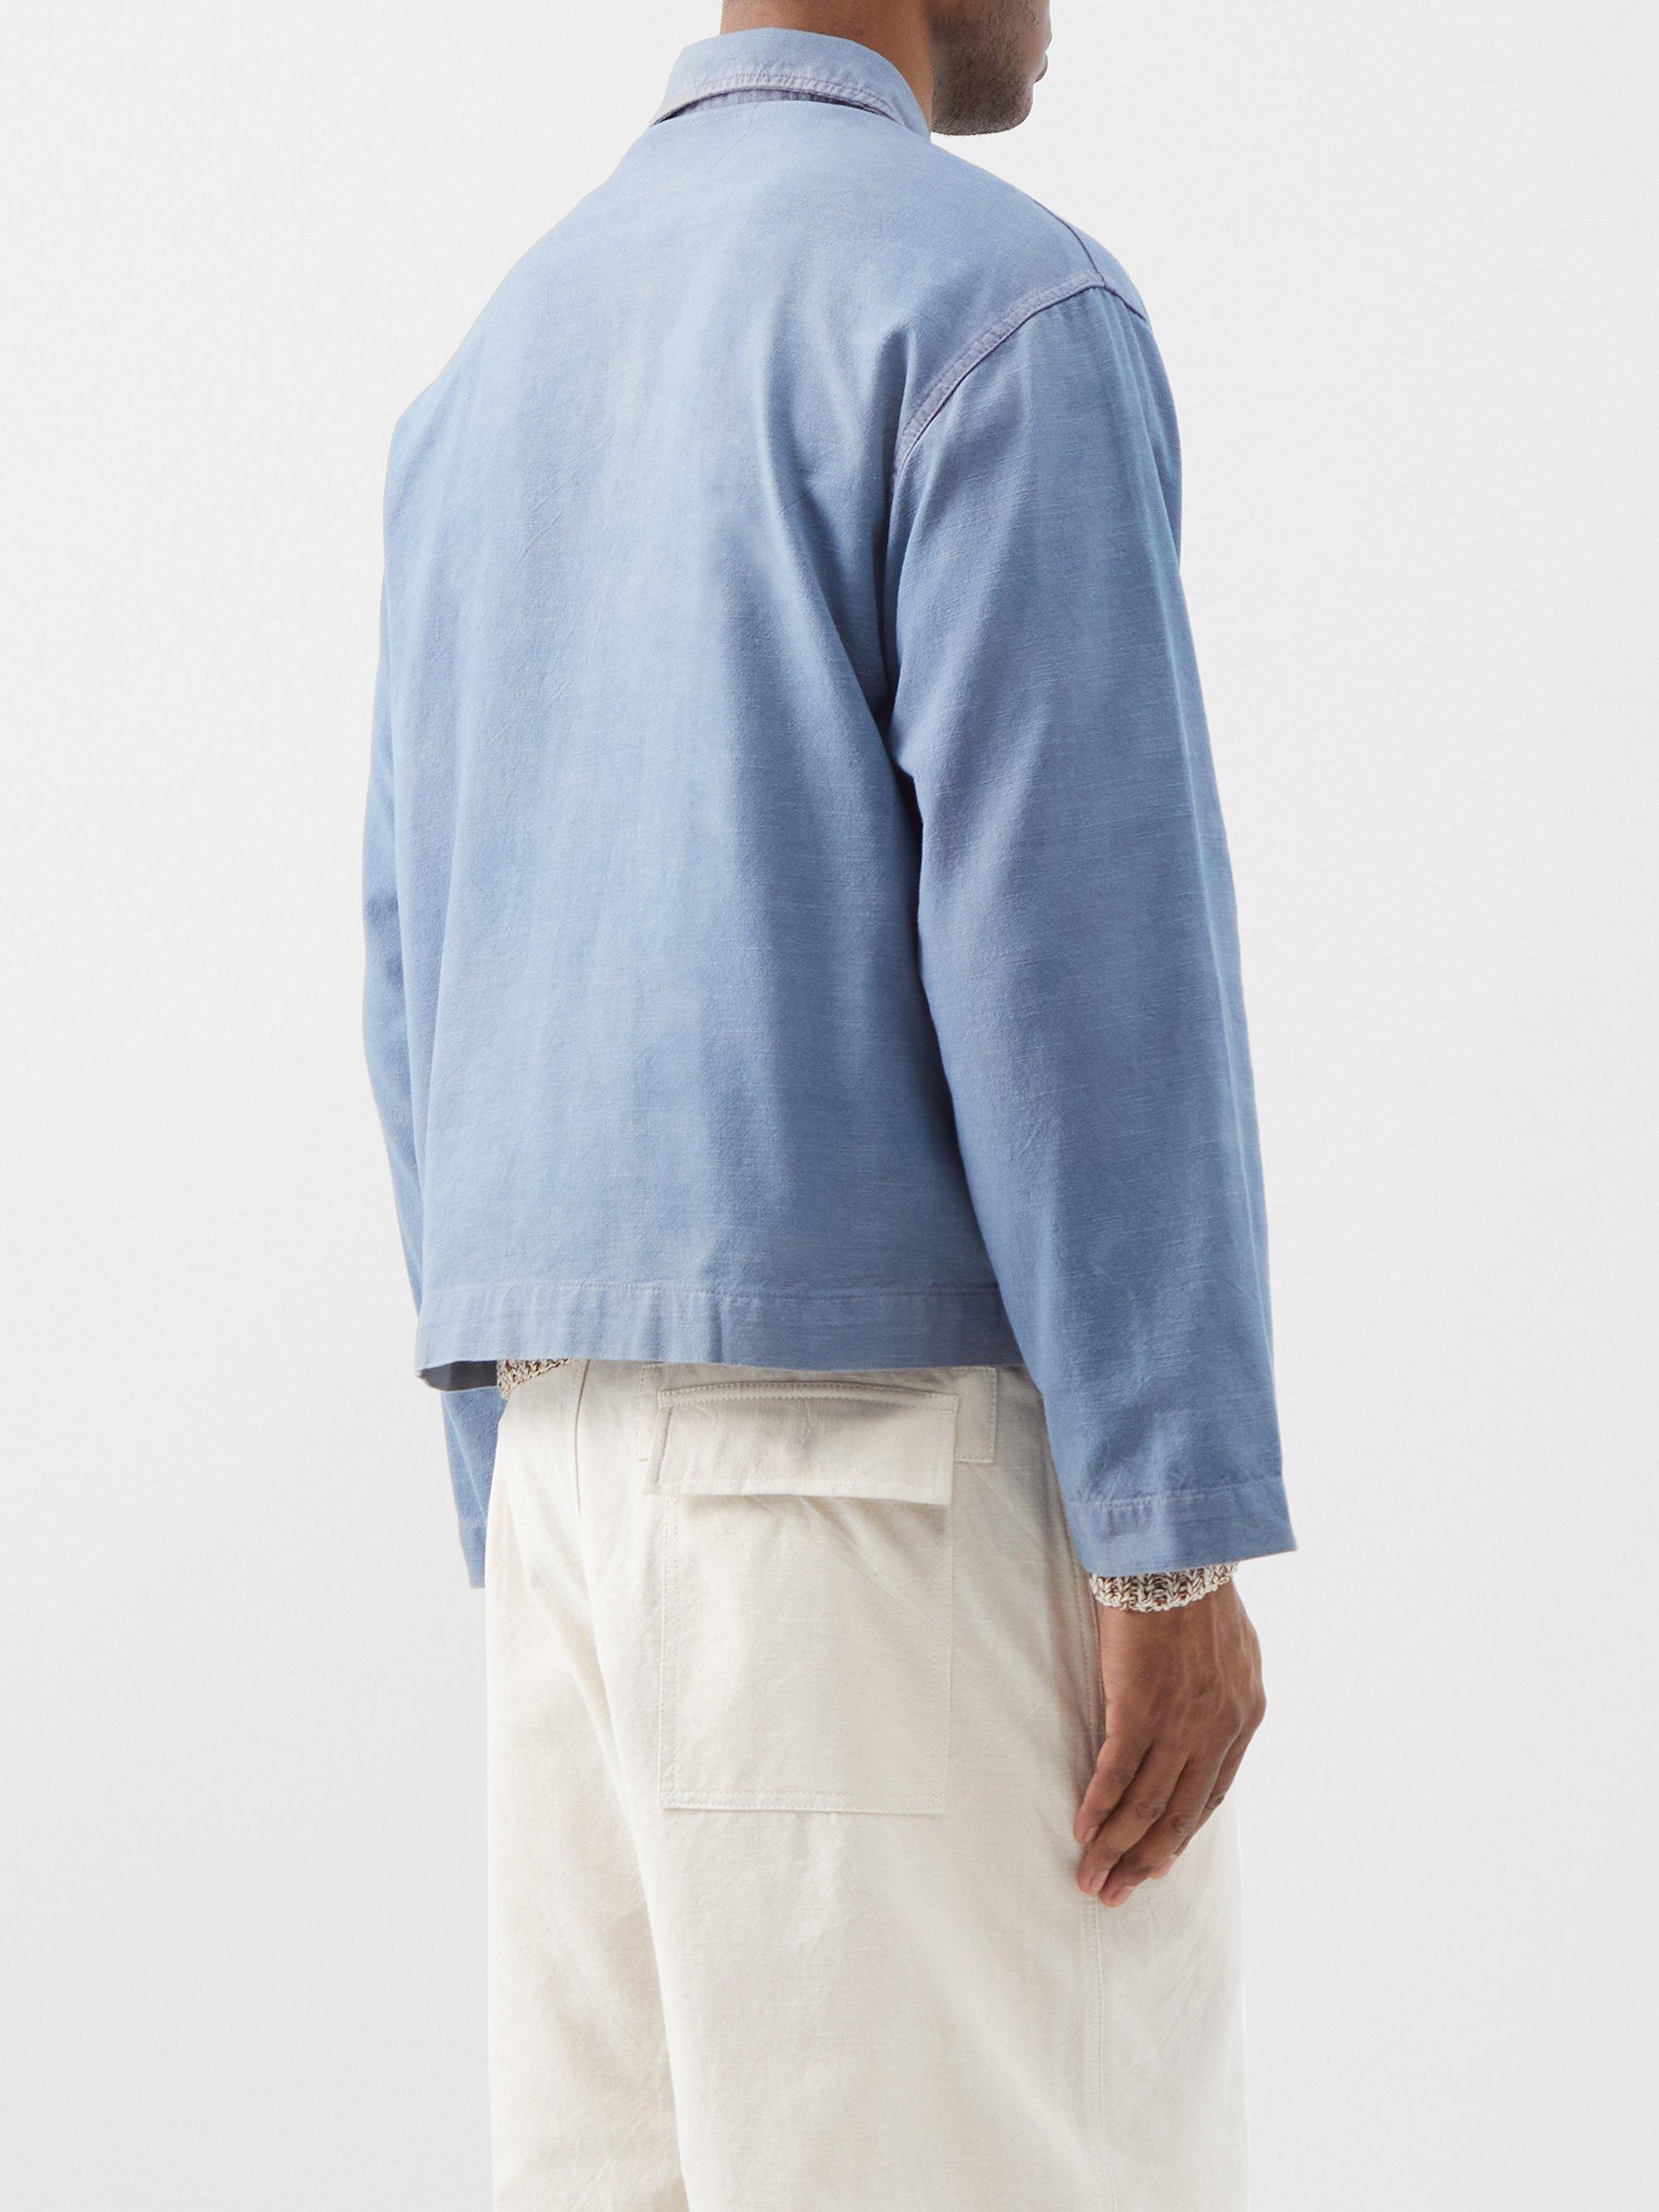 STORY mfg. Short On Time Embroidered Organic-cotton Jacket in Blue